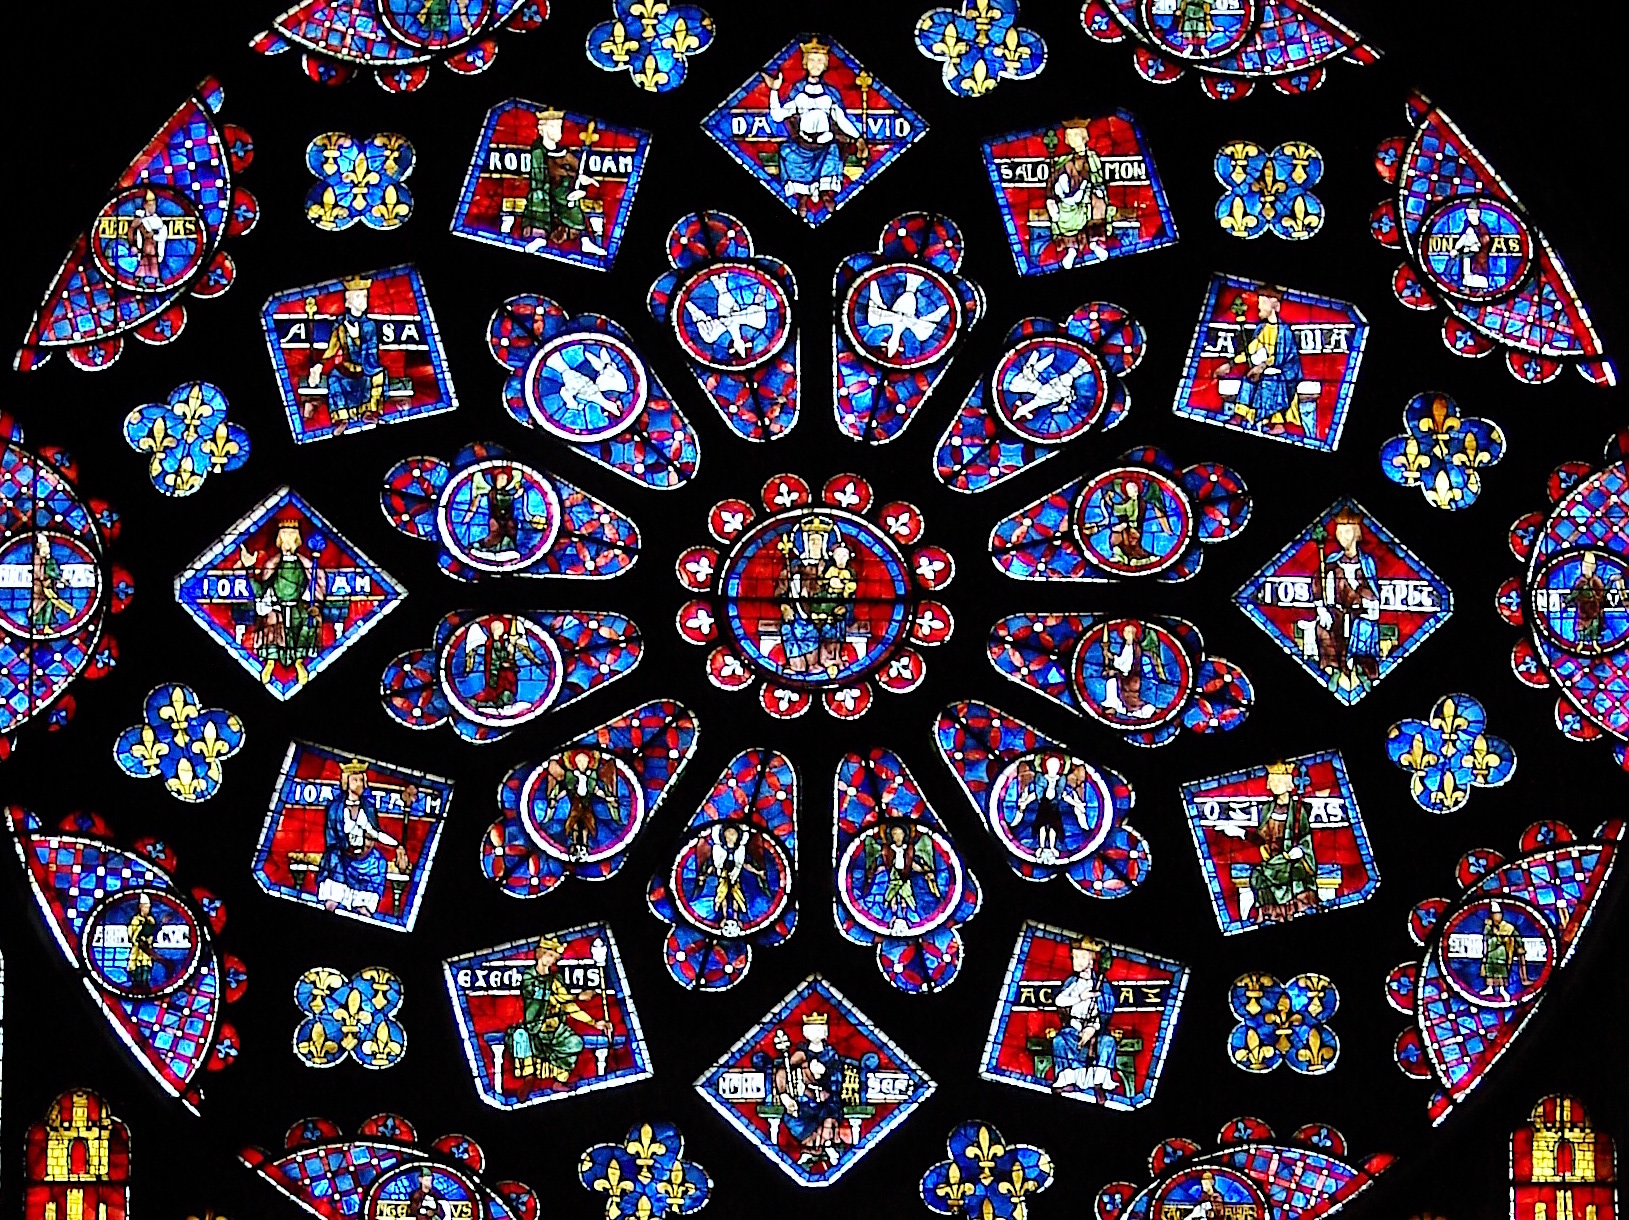 Chartres Cathedral, History, Interior, Stained Glass, & Facts